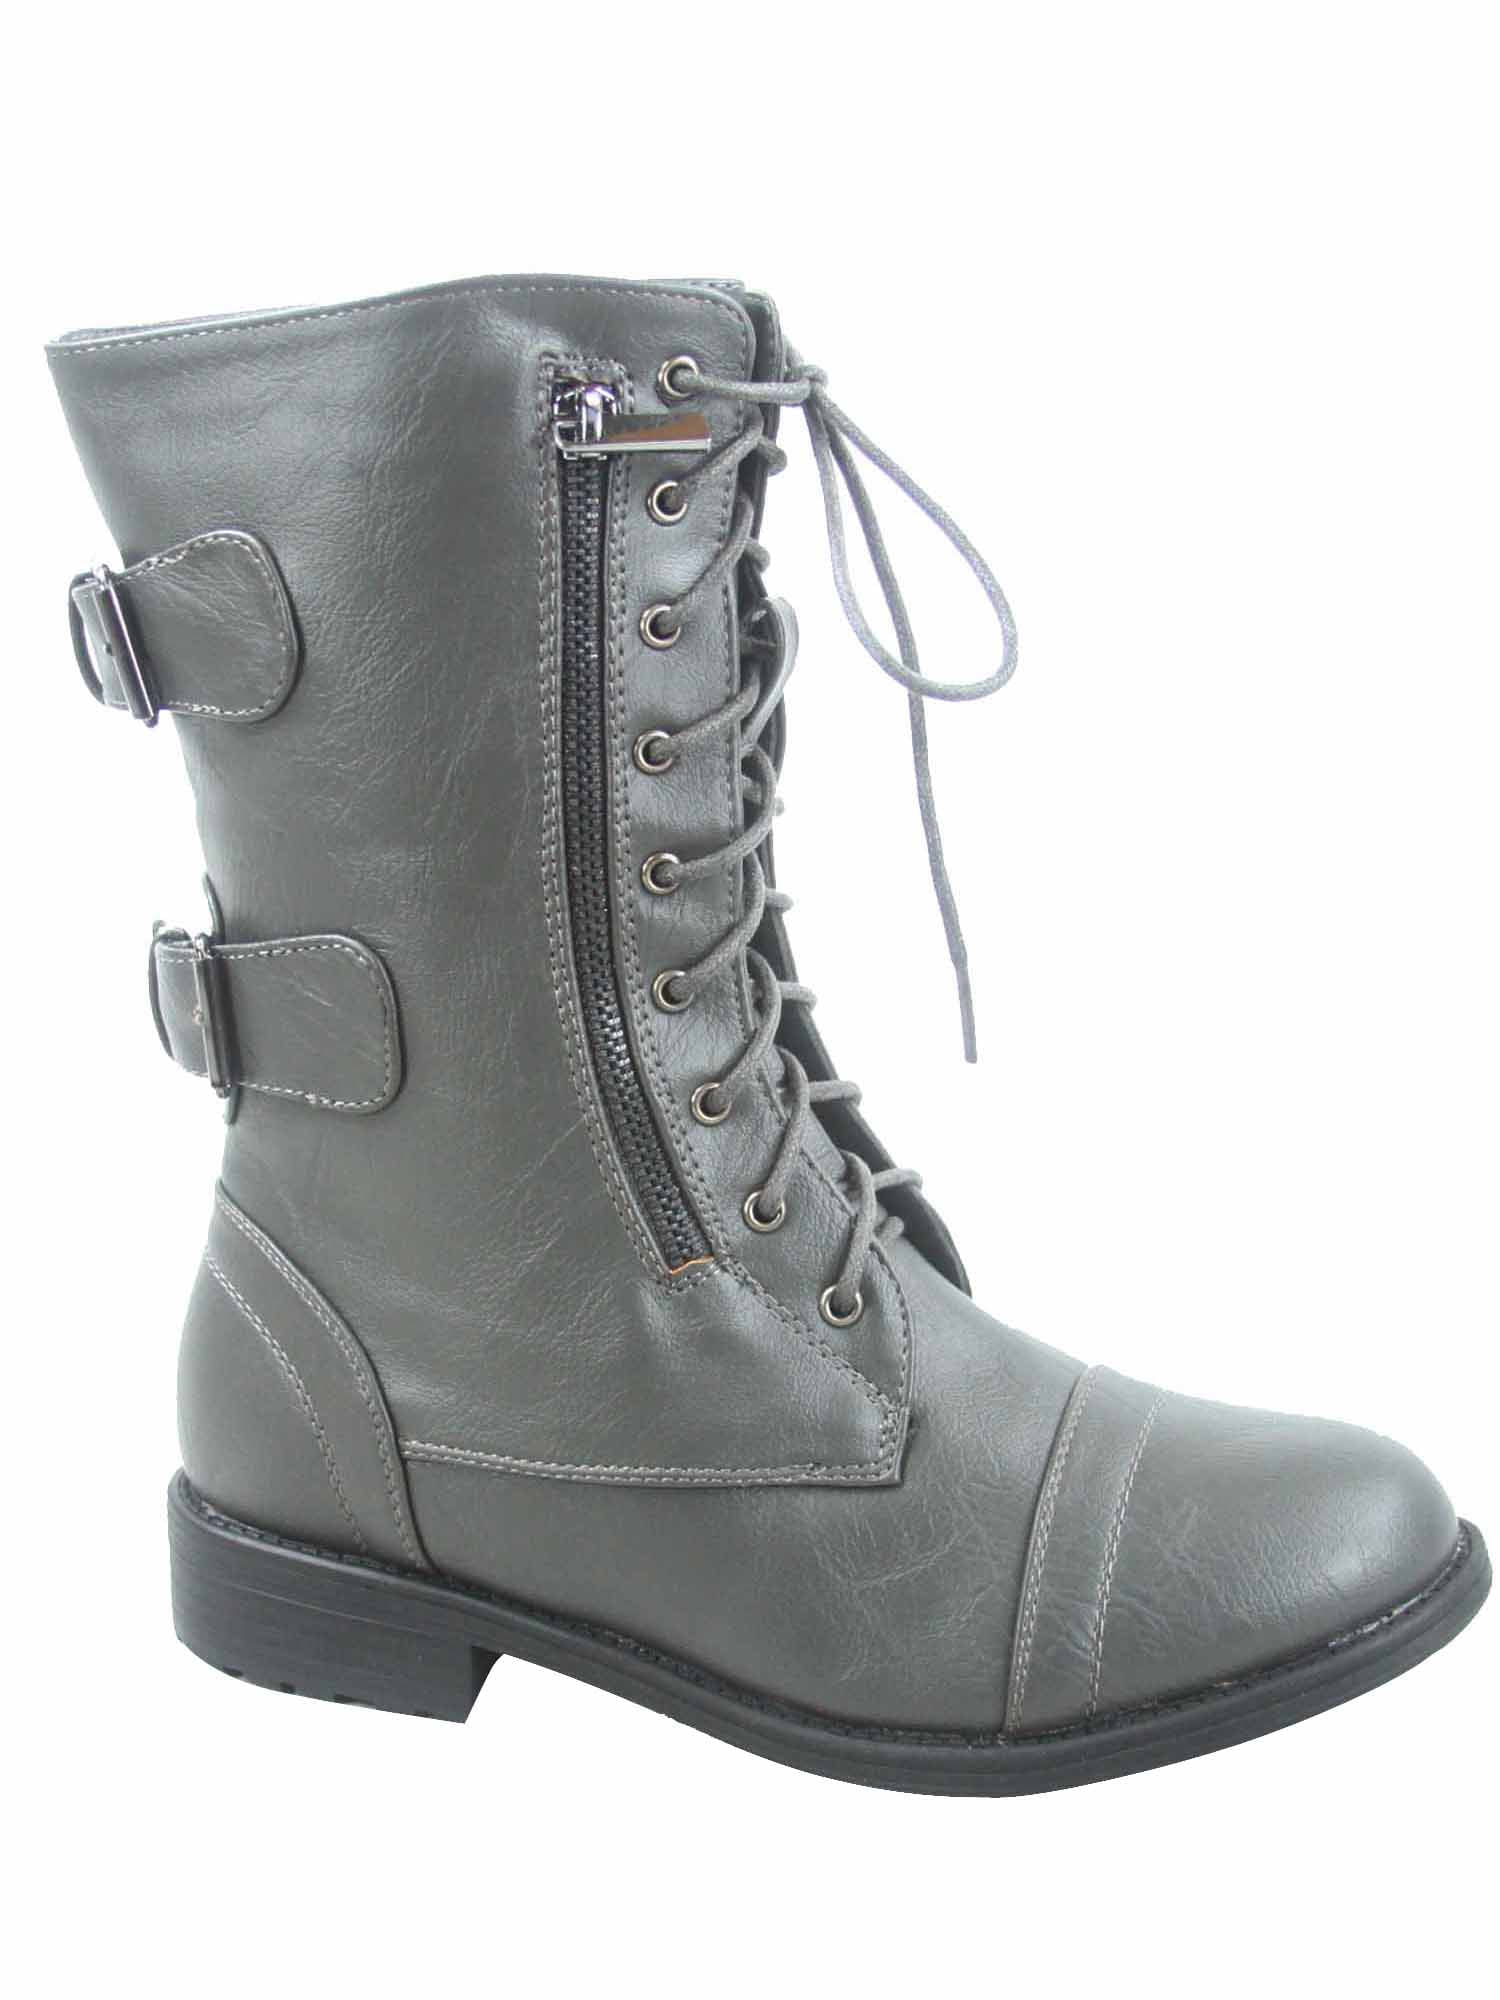 Fordable Round Toe Low Heel Combat Military Lace Up Mid Calf Womens Shoes Size 